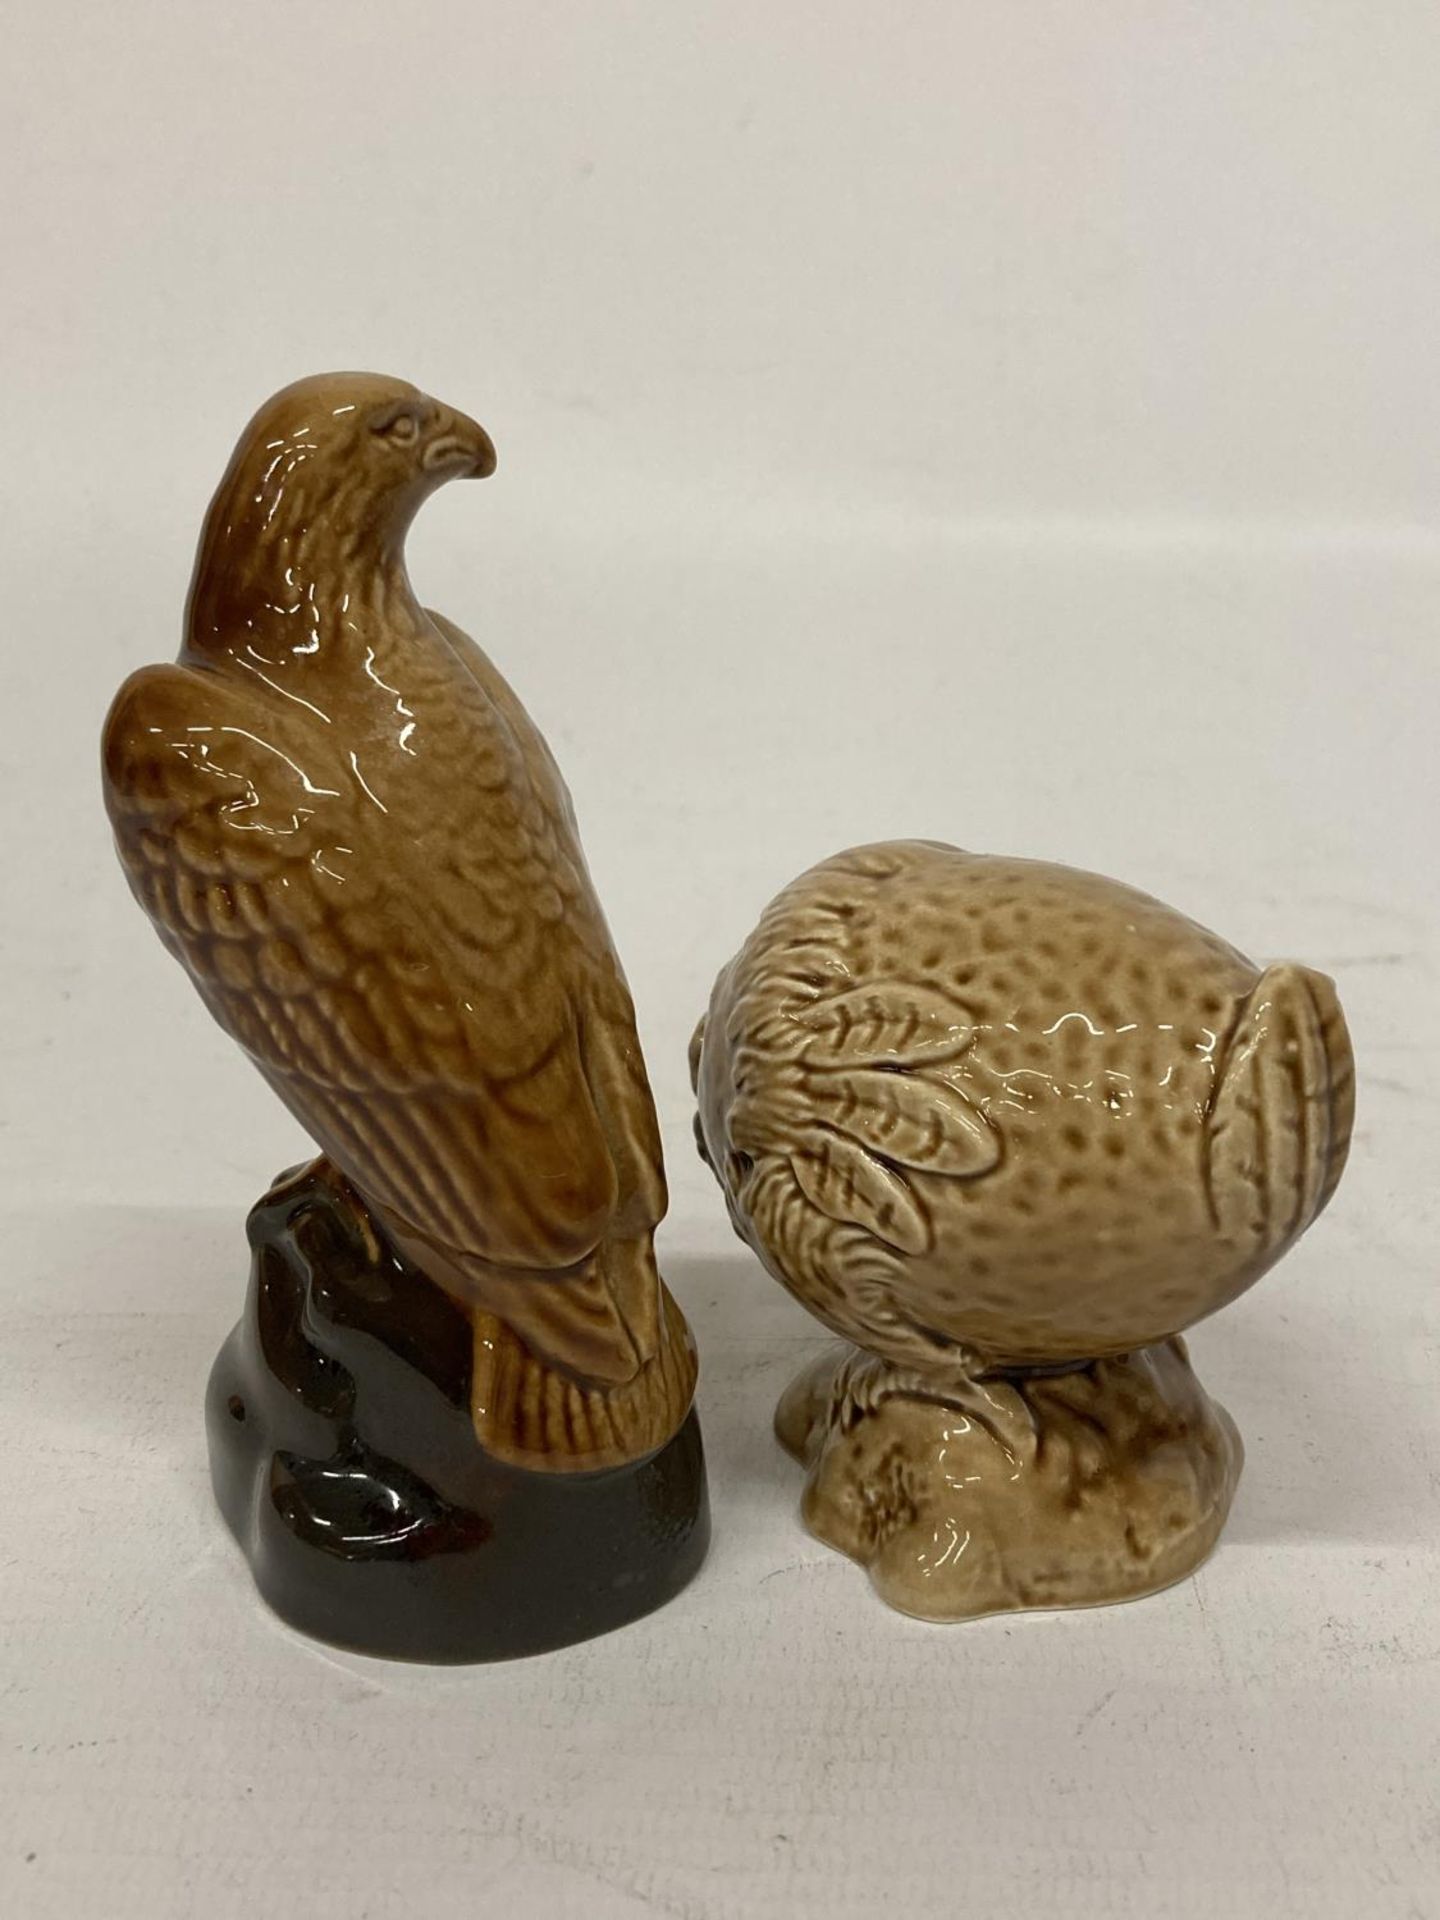 A BESWICK BENEAGLES SCOTCH WHISKEY MINIATURE EAGLE TOGETHER WITH A FLYING HAGGIS MINIATURE - Image 3 of 4